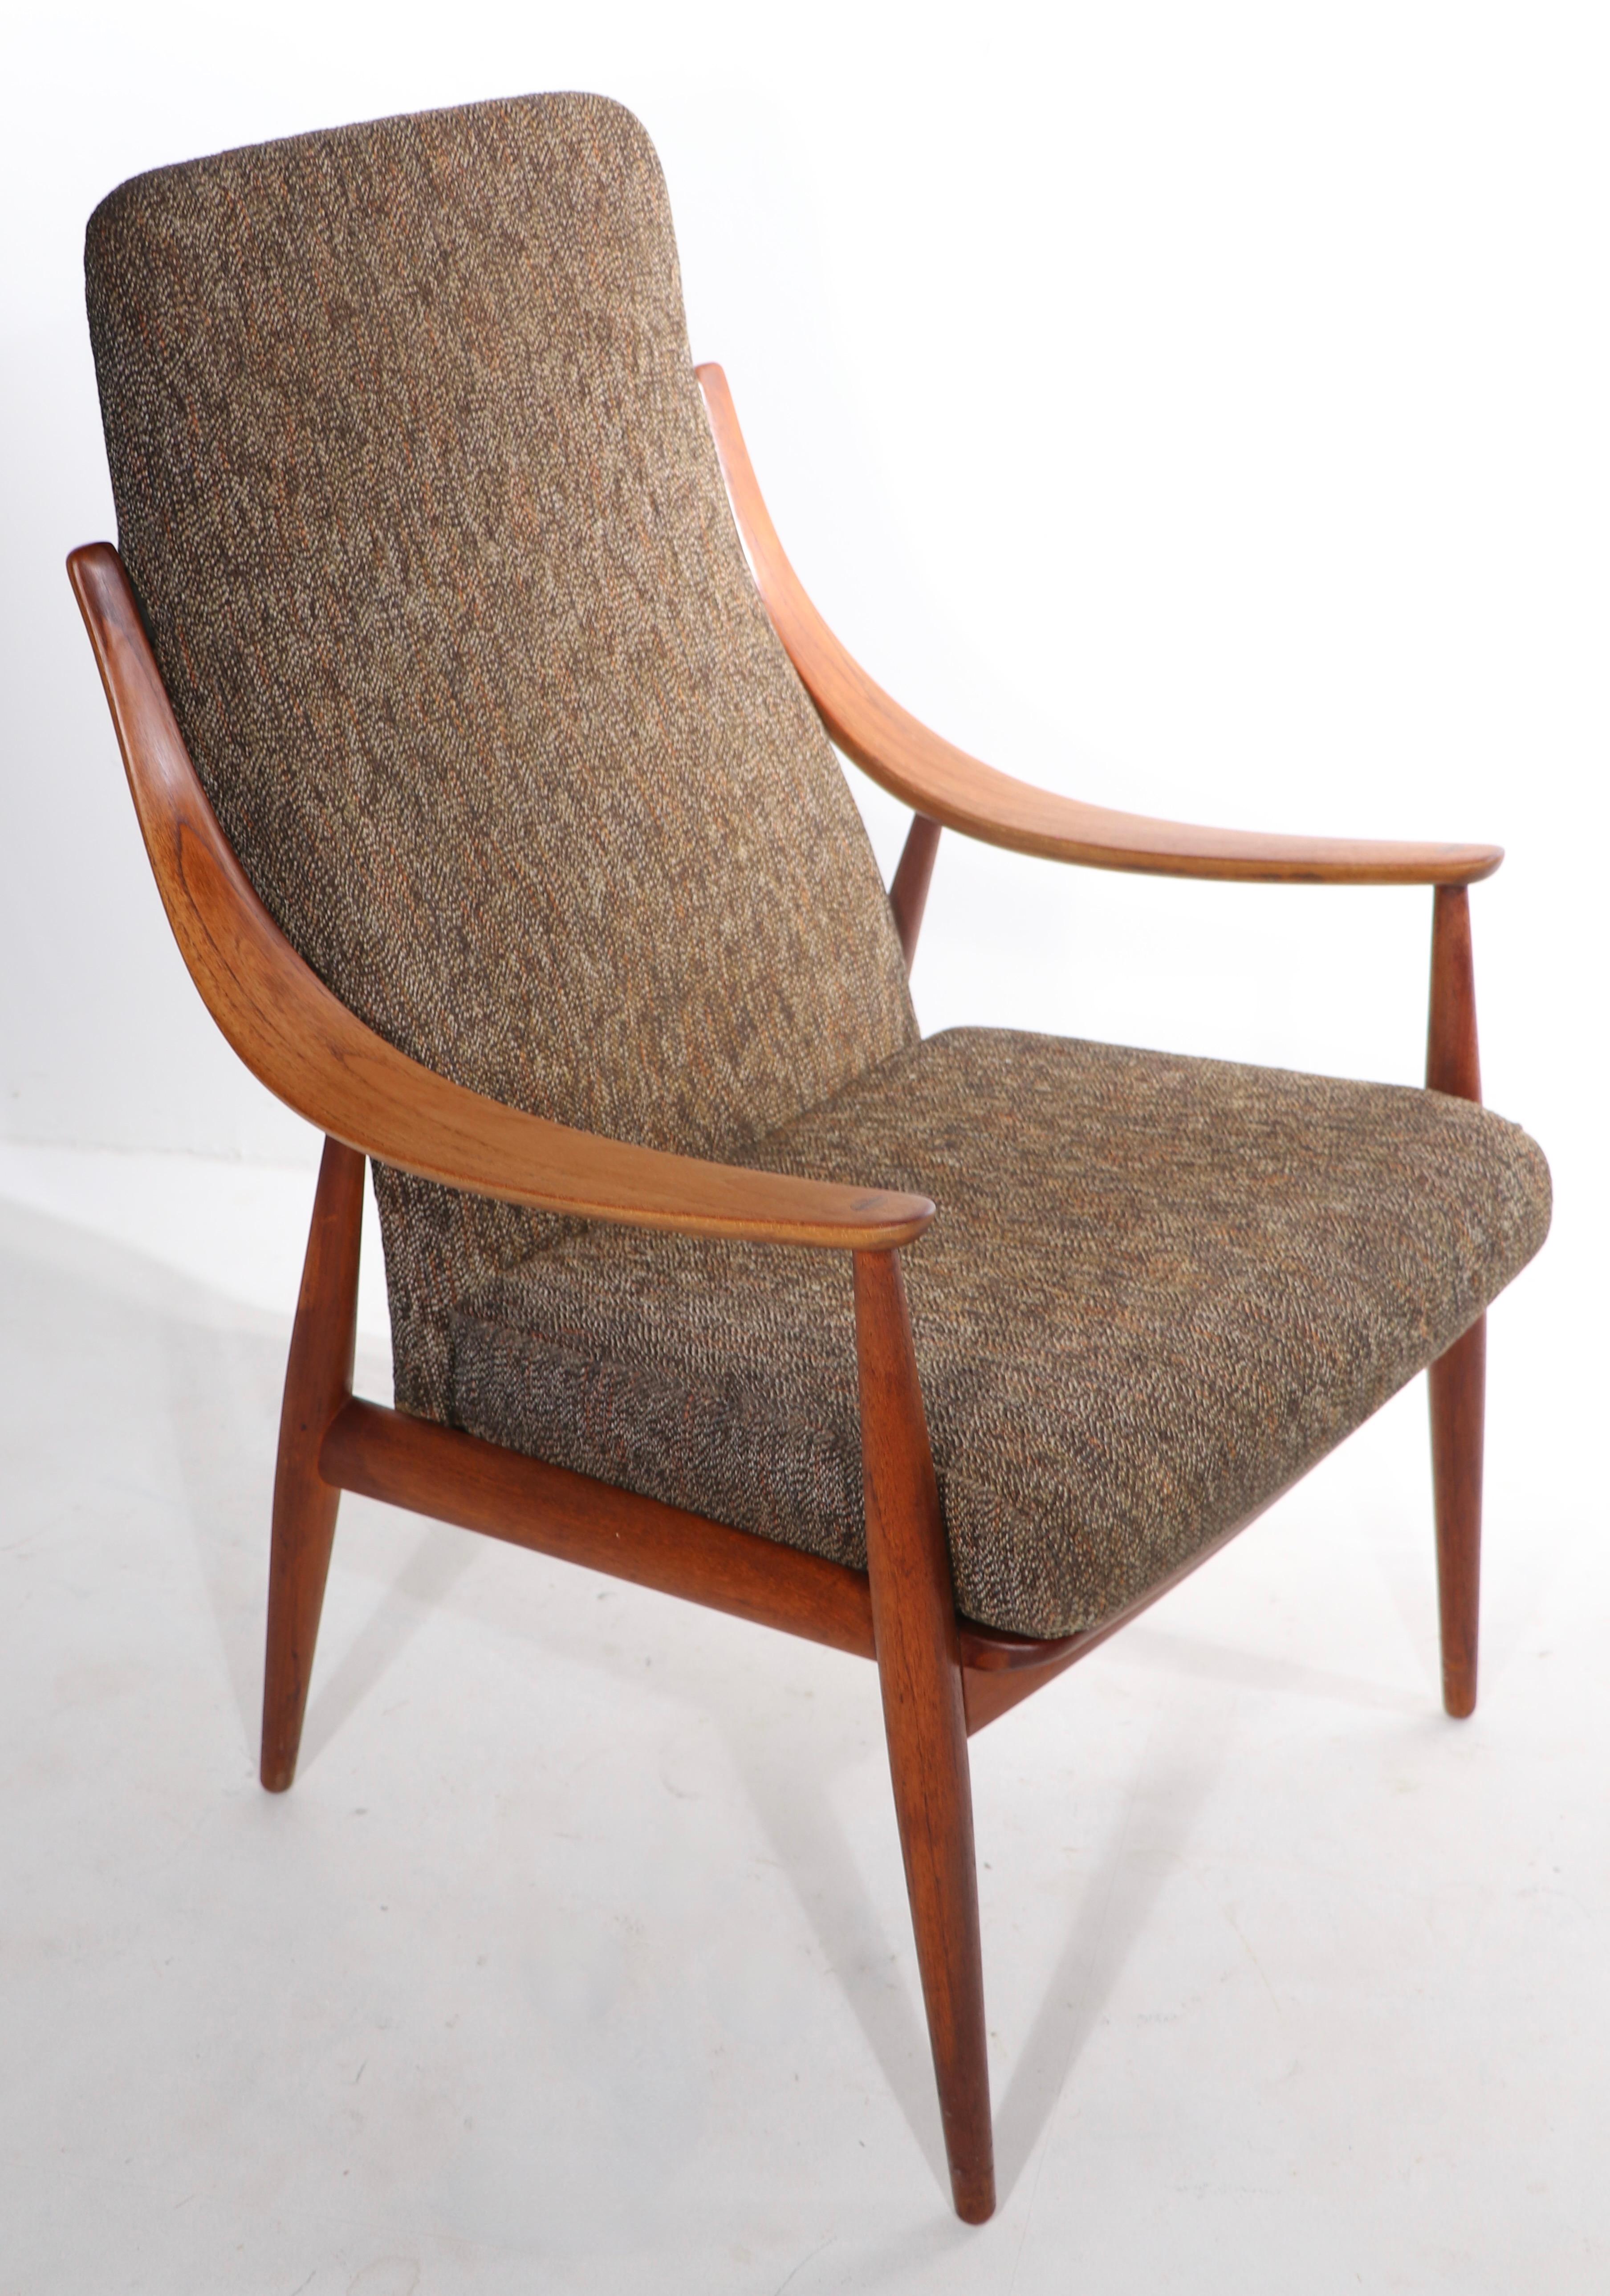 Danish High Back Lounge Chair by Hvidt and Molgaard, Nielsen For Sale